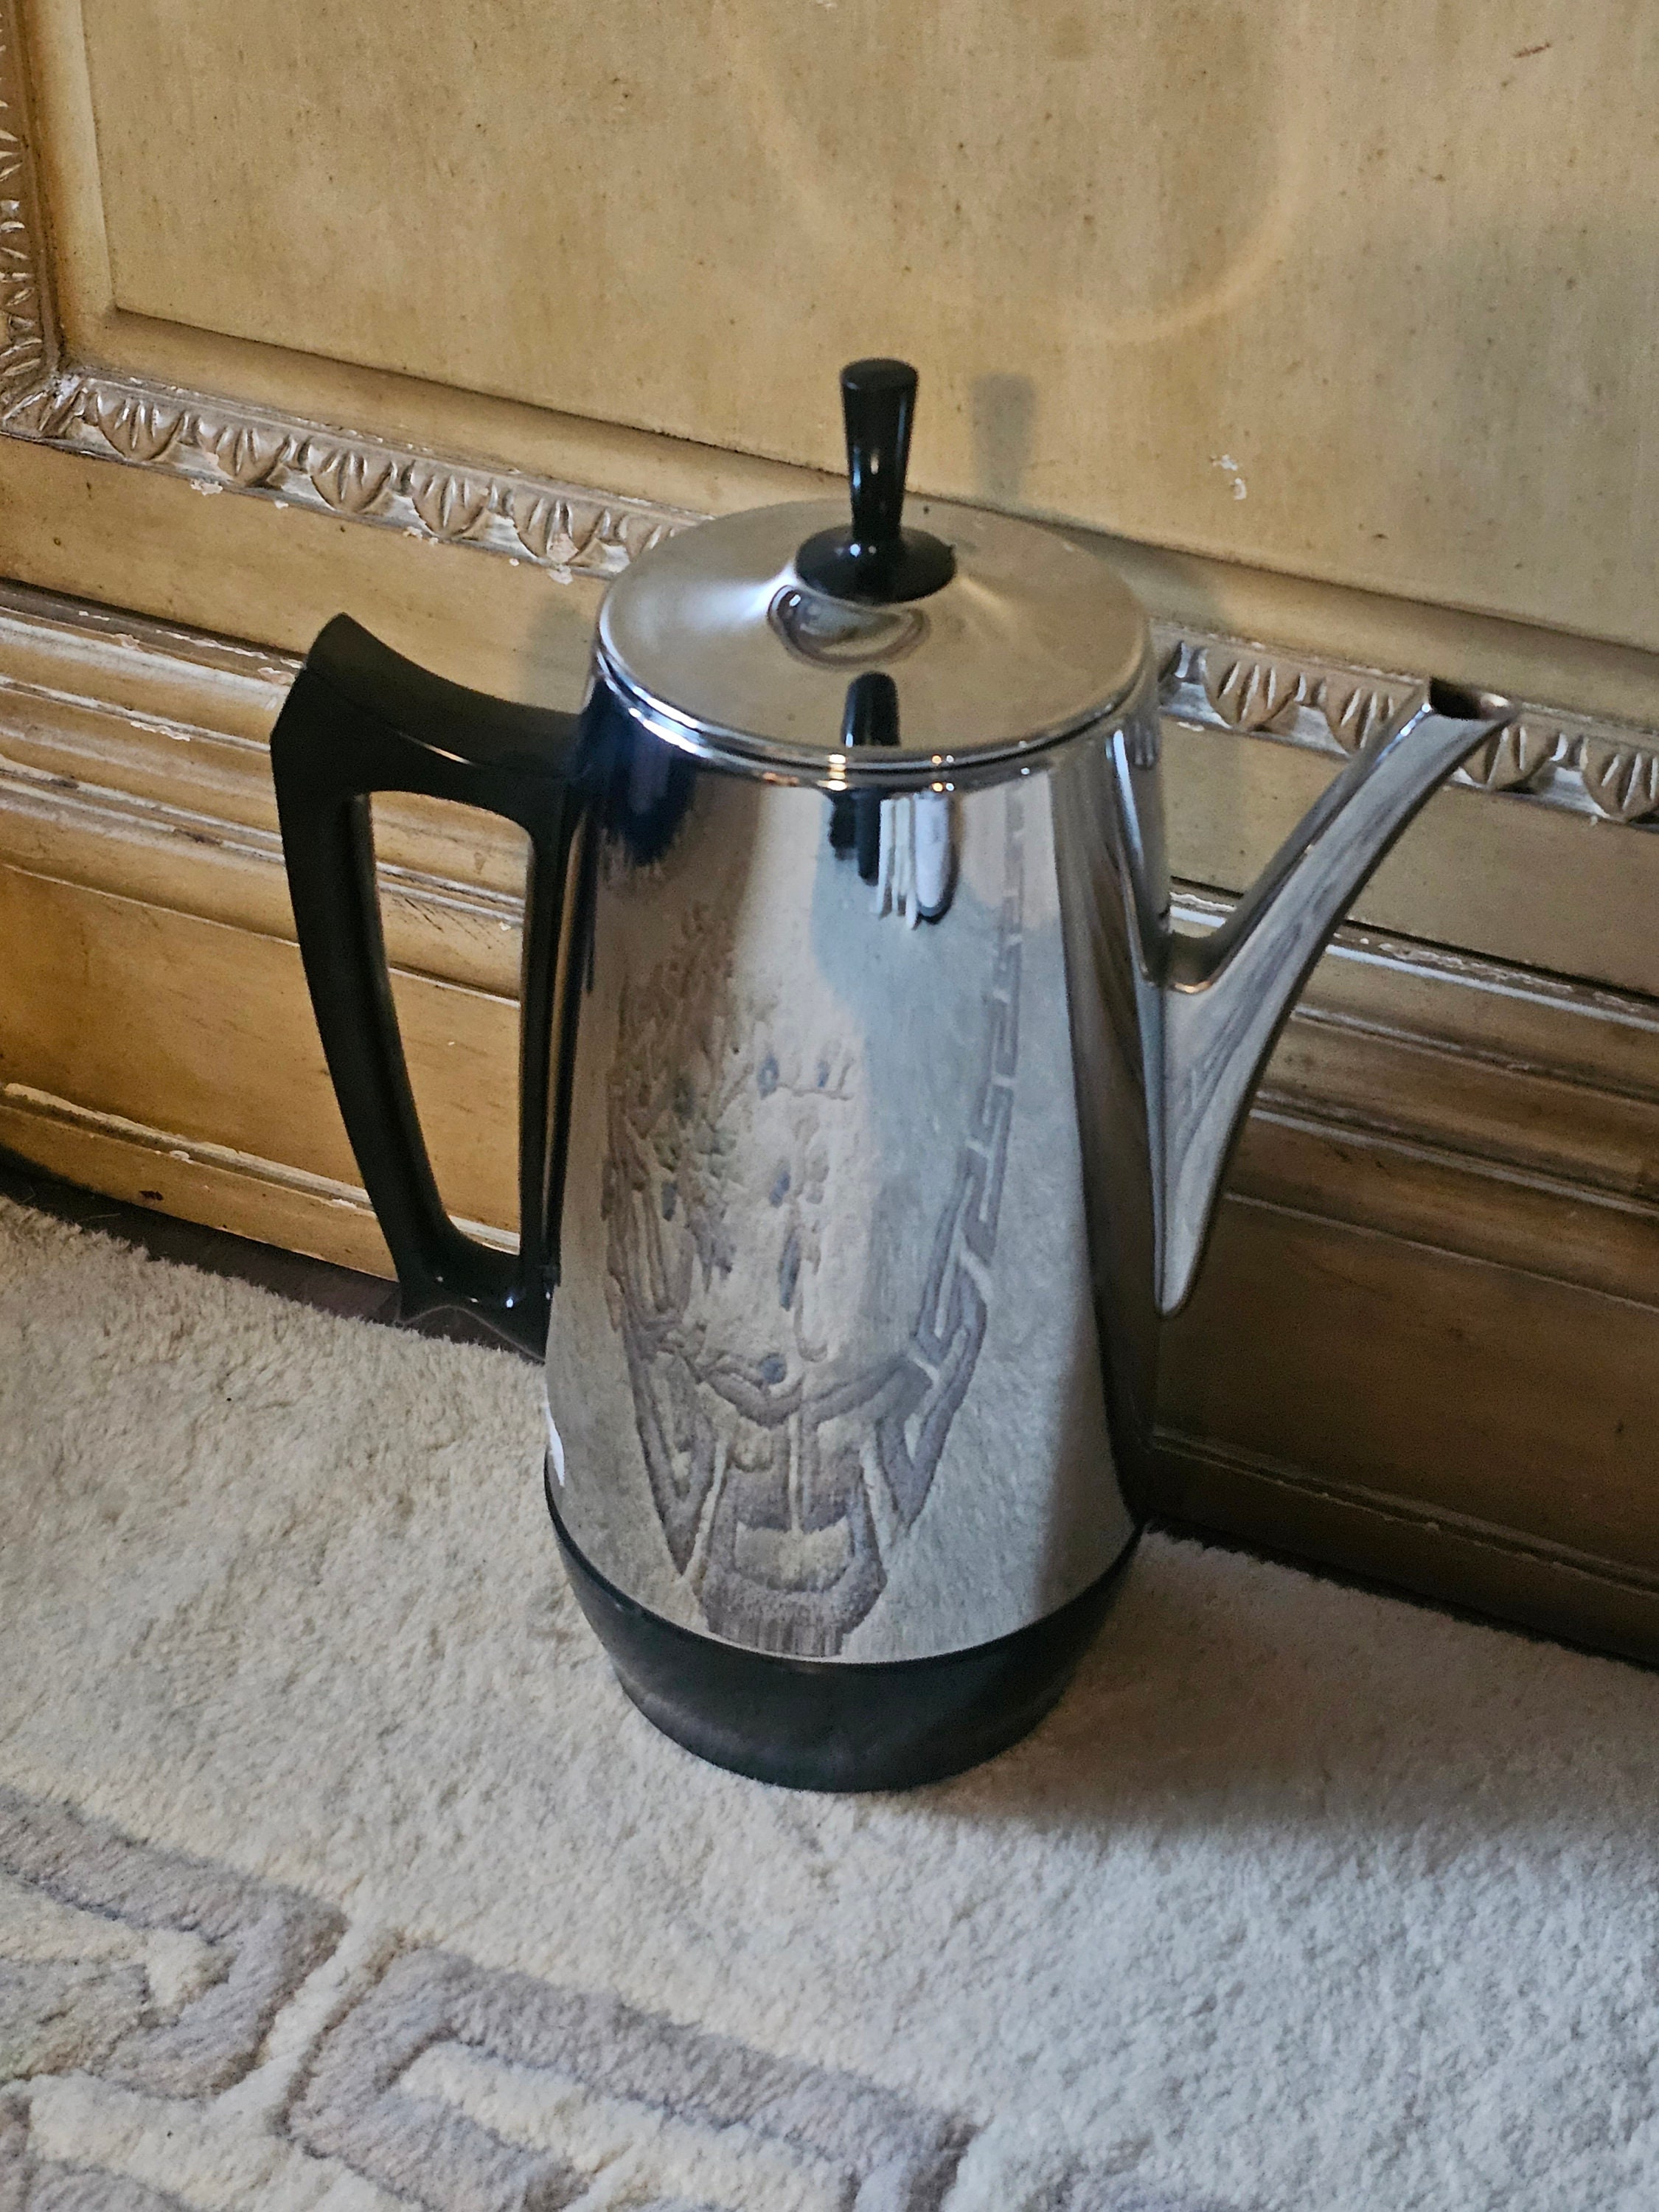 Vintage GE GENERAL ELECTRIC AUTOMATIC PERCOLATOR 36P12 COFFEE POT MAKER